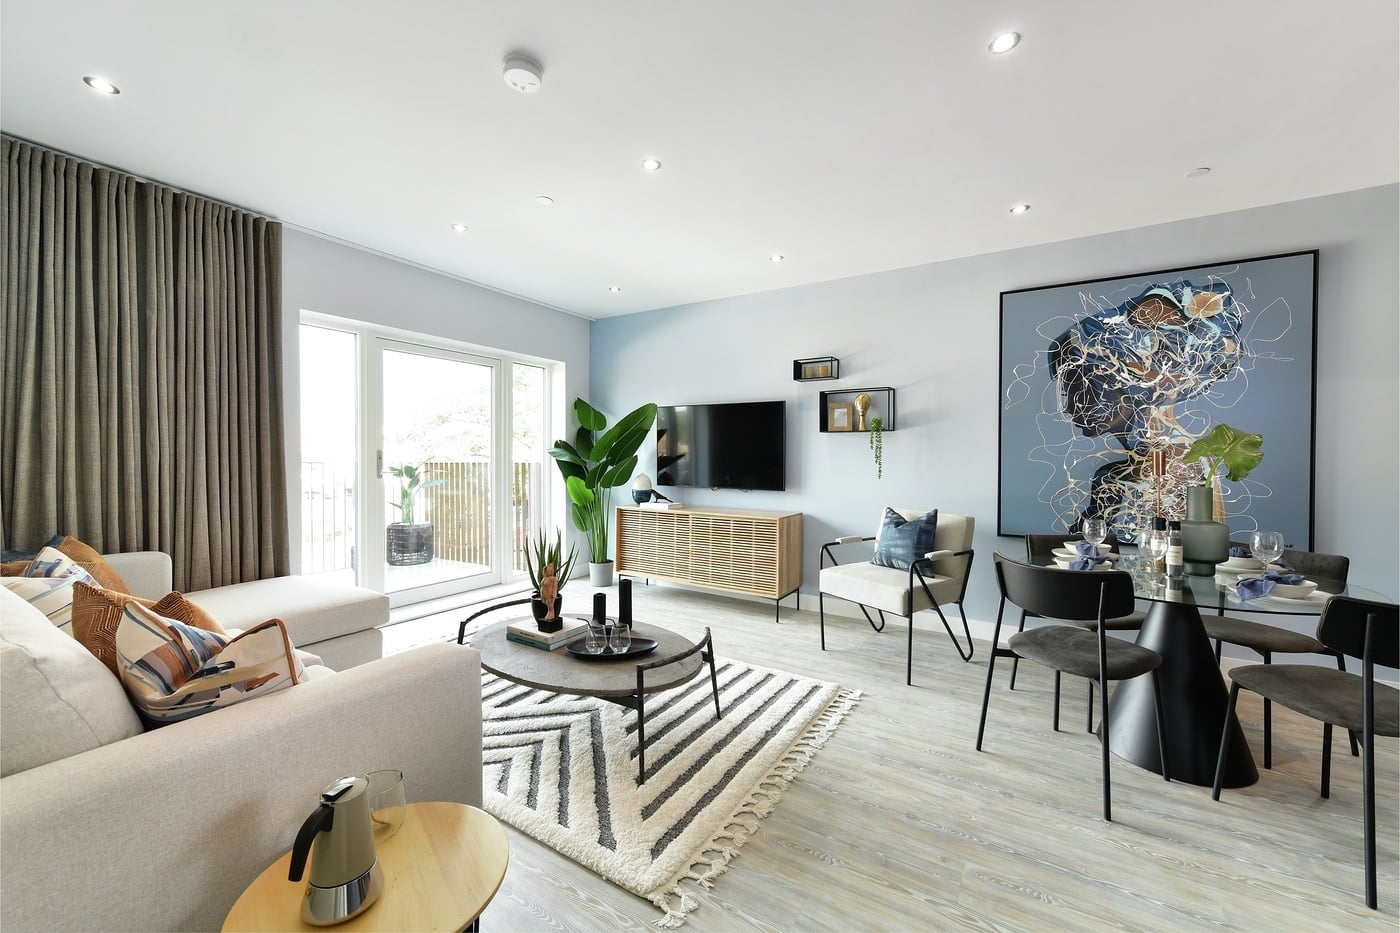 Image of a living room at Lampton Parkside in Hounslow, from NHG Homes - Start your property journey on Share to Buy!